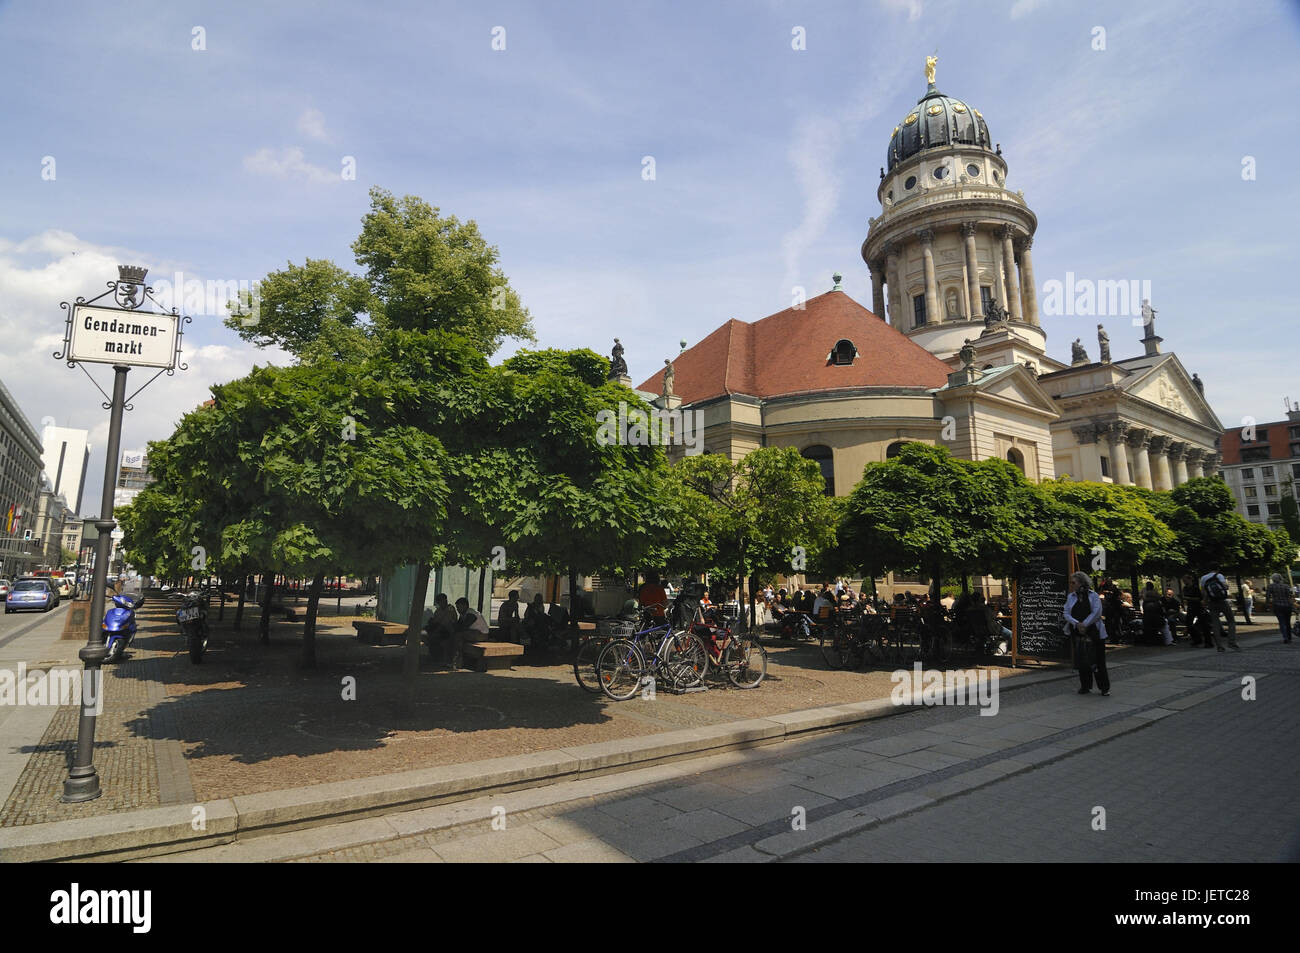 French cathedral, gendarme's market, Berlin, Germany, Stock Photo